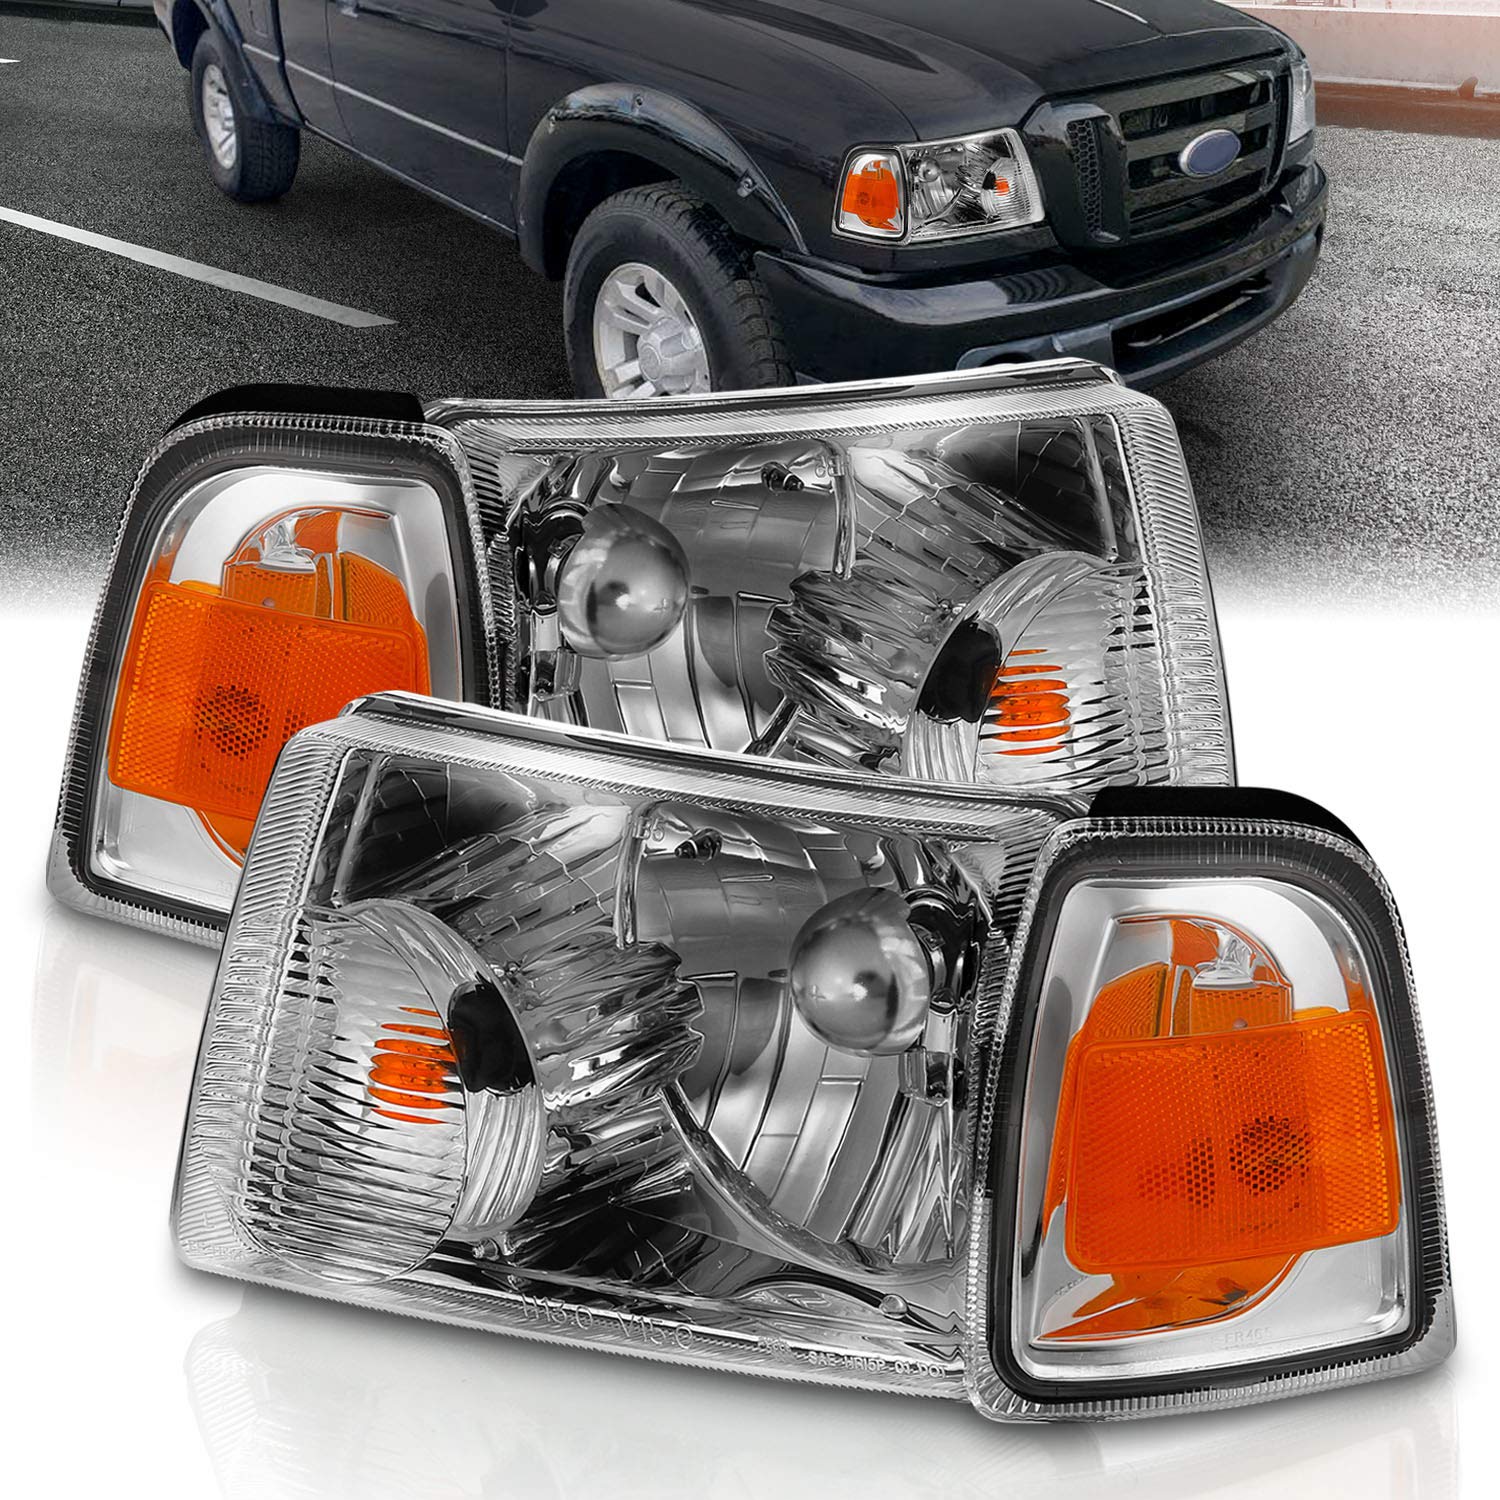 AmeriLite for 2001-2011 Ford Ranger Pickup Truck Chrome Factory OE Style  Replacement Headlights Assembly Corner